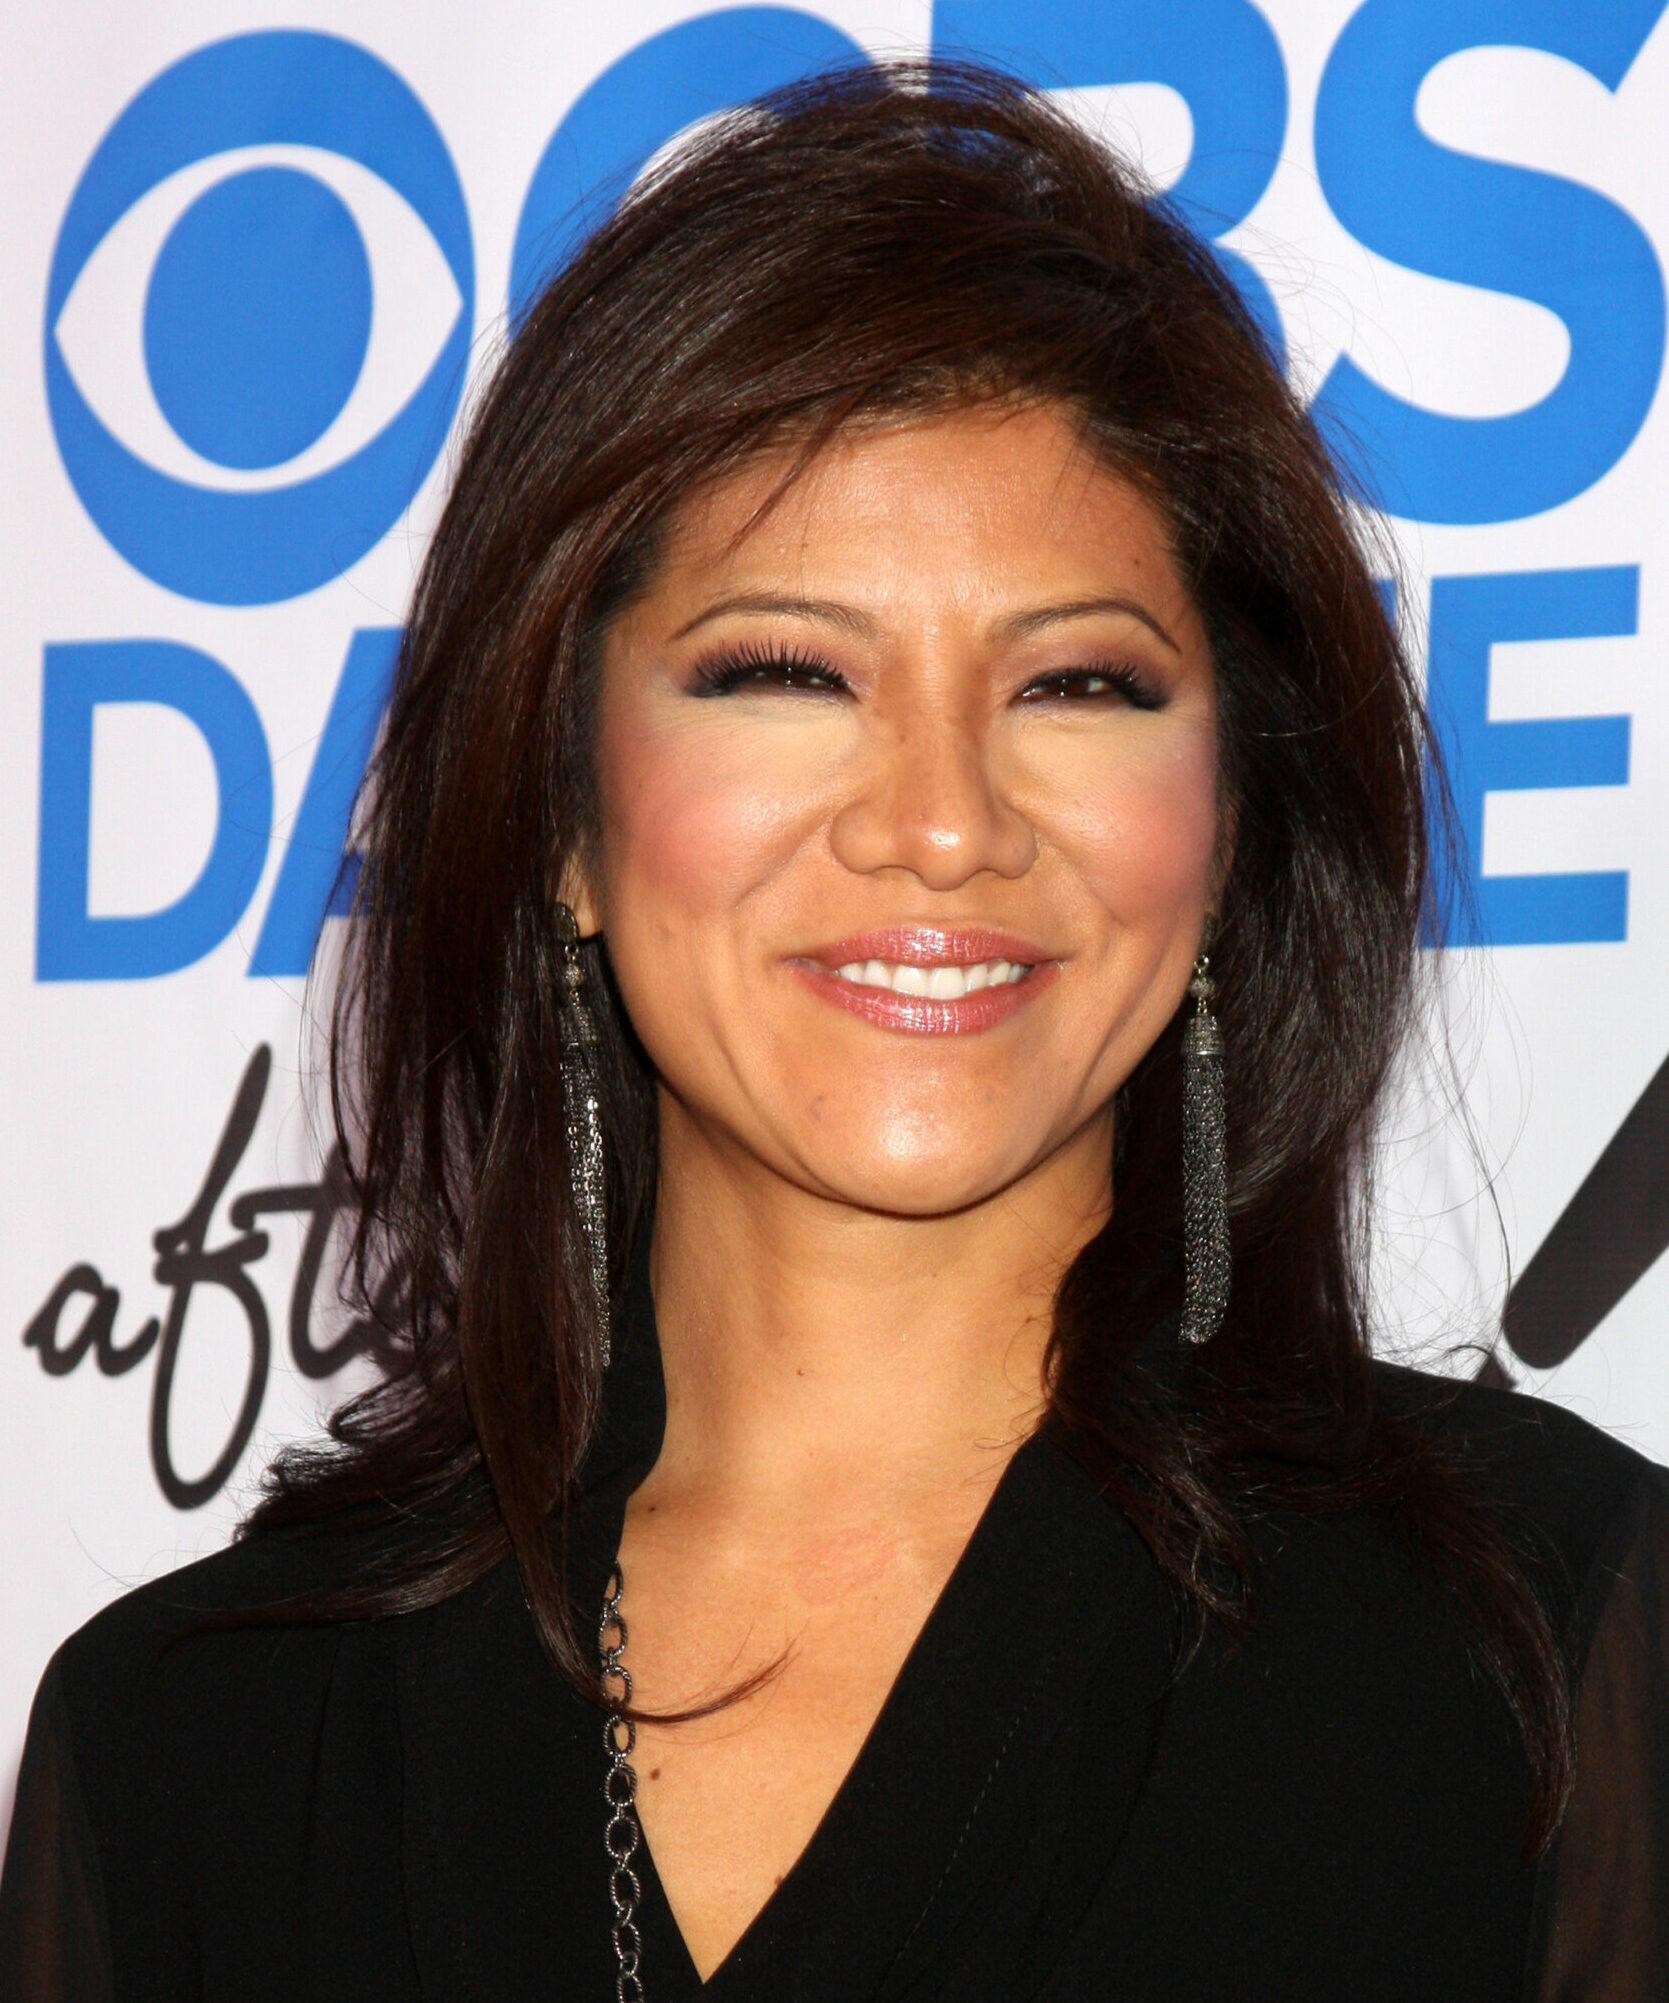 Julie Chen at the CBS Daytime After Dark Event at Comedy Store on October 8, 2013 in West Hollywood, CA